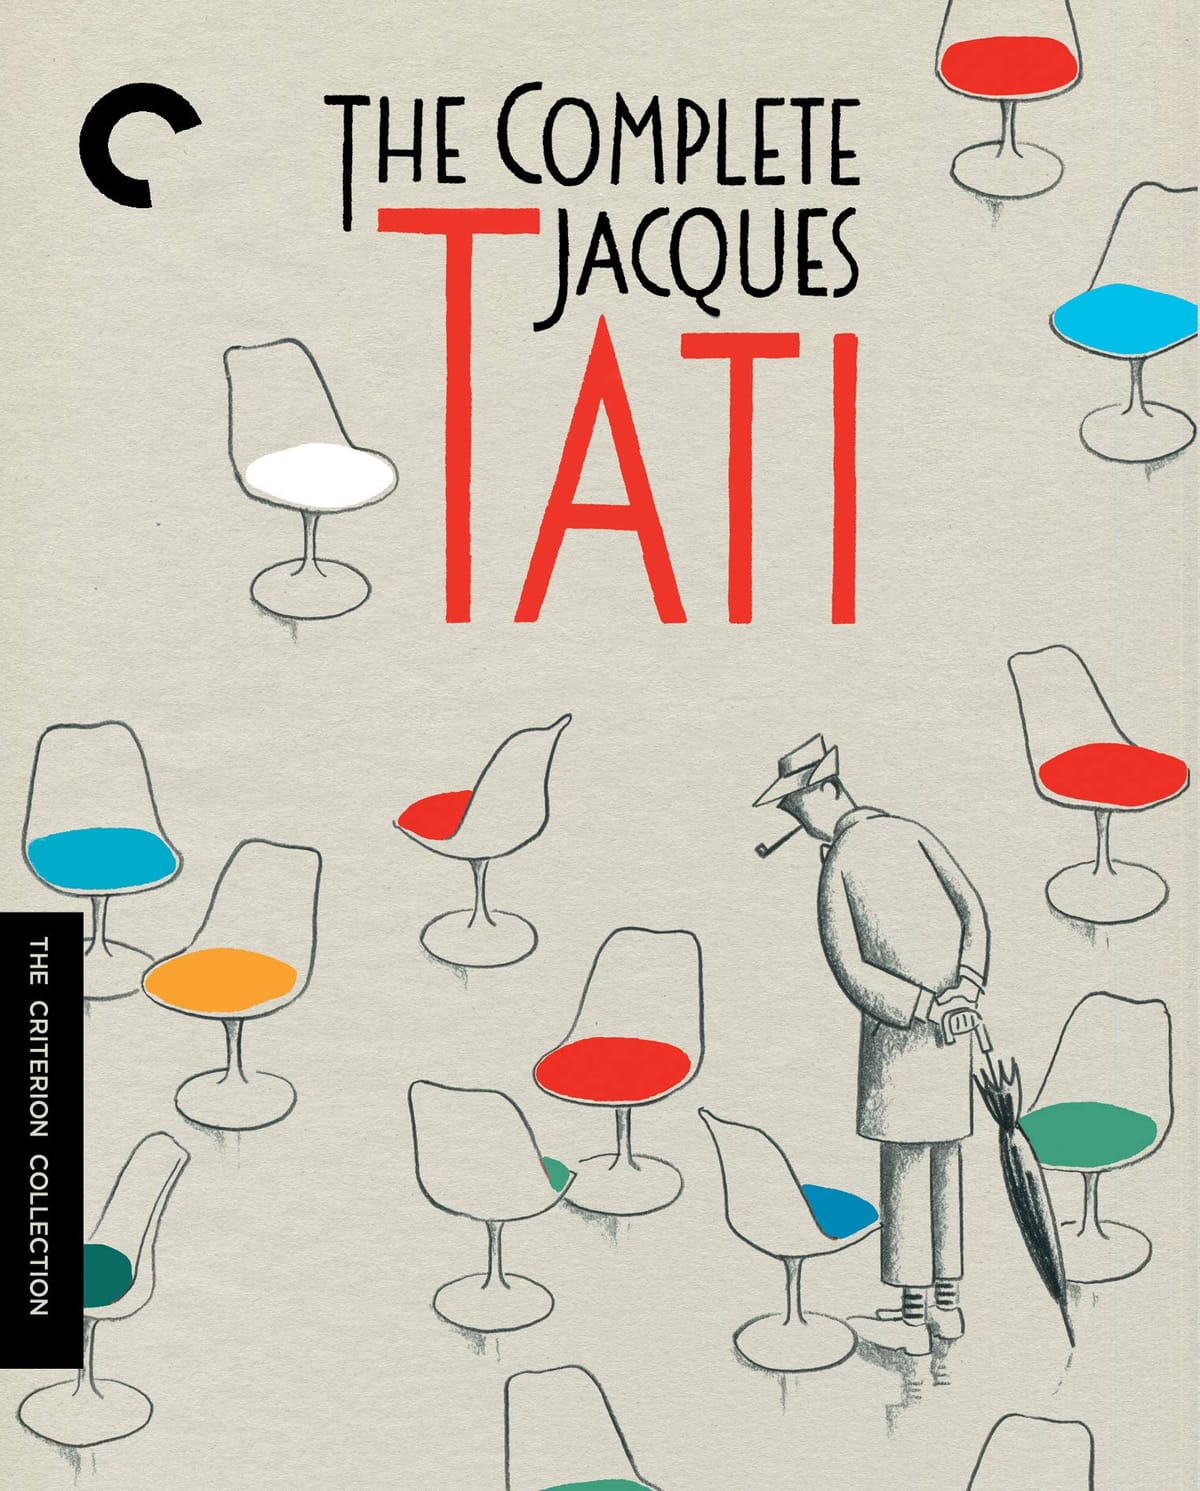 CRITERION COLLECTION: THE COMPLETE JACQUES TATI